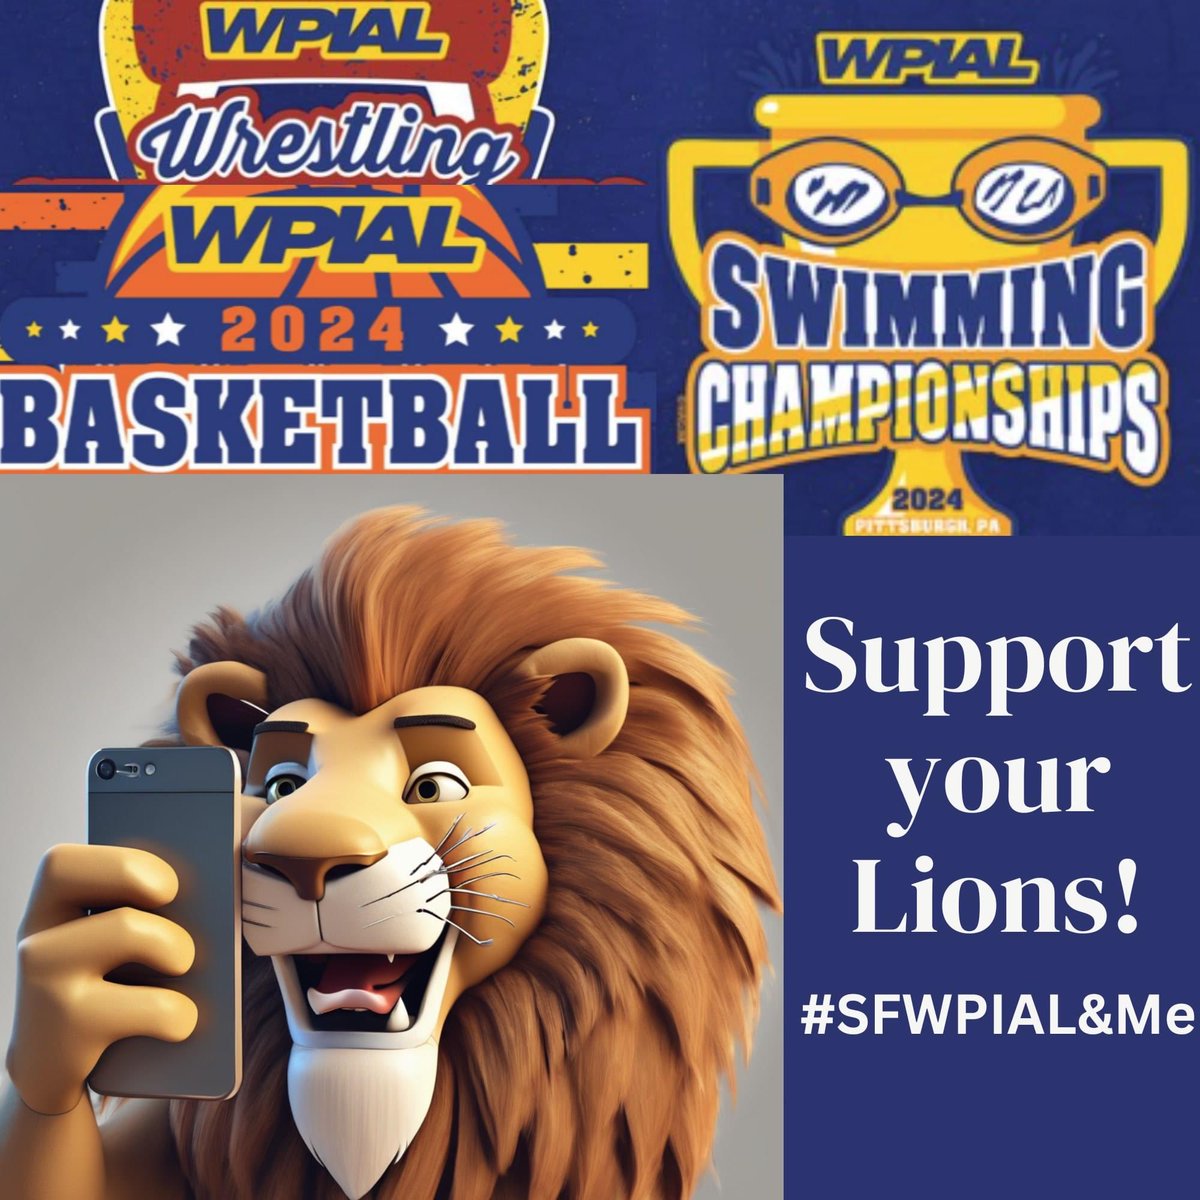 Hey Lion Learners! If you are at a SF athletic competition today, take a selfie and post it to #SFWPIAL&Me 🦁 We’ll pick the best selfies and award prizes! I can’t wait to watch you pose at the Pete today! Have fun! ⁦@SouthFayetteSD⁩ #SFLionPride